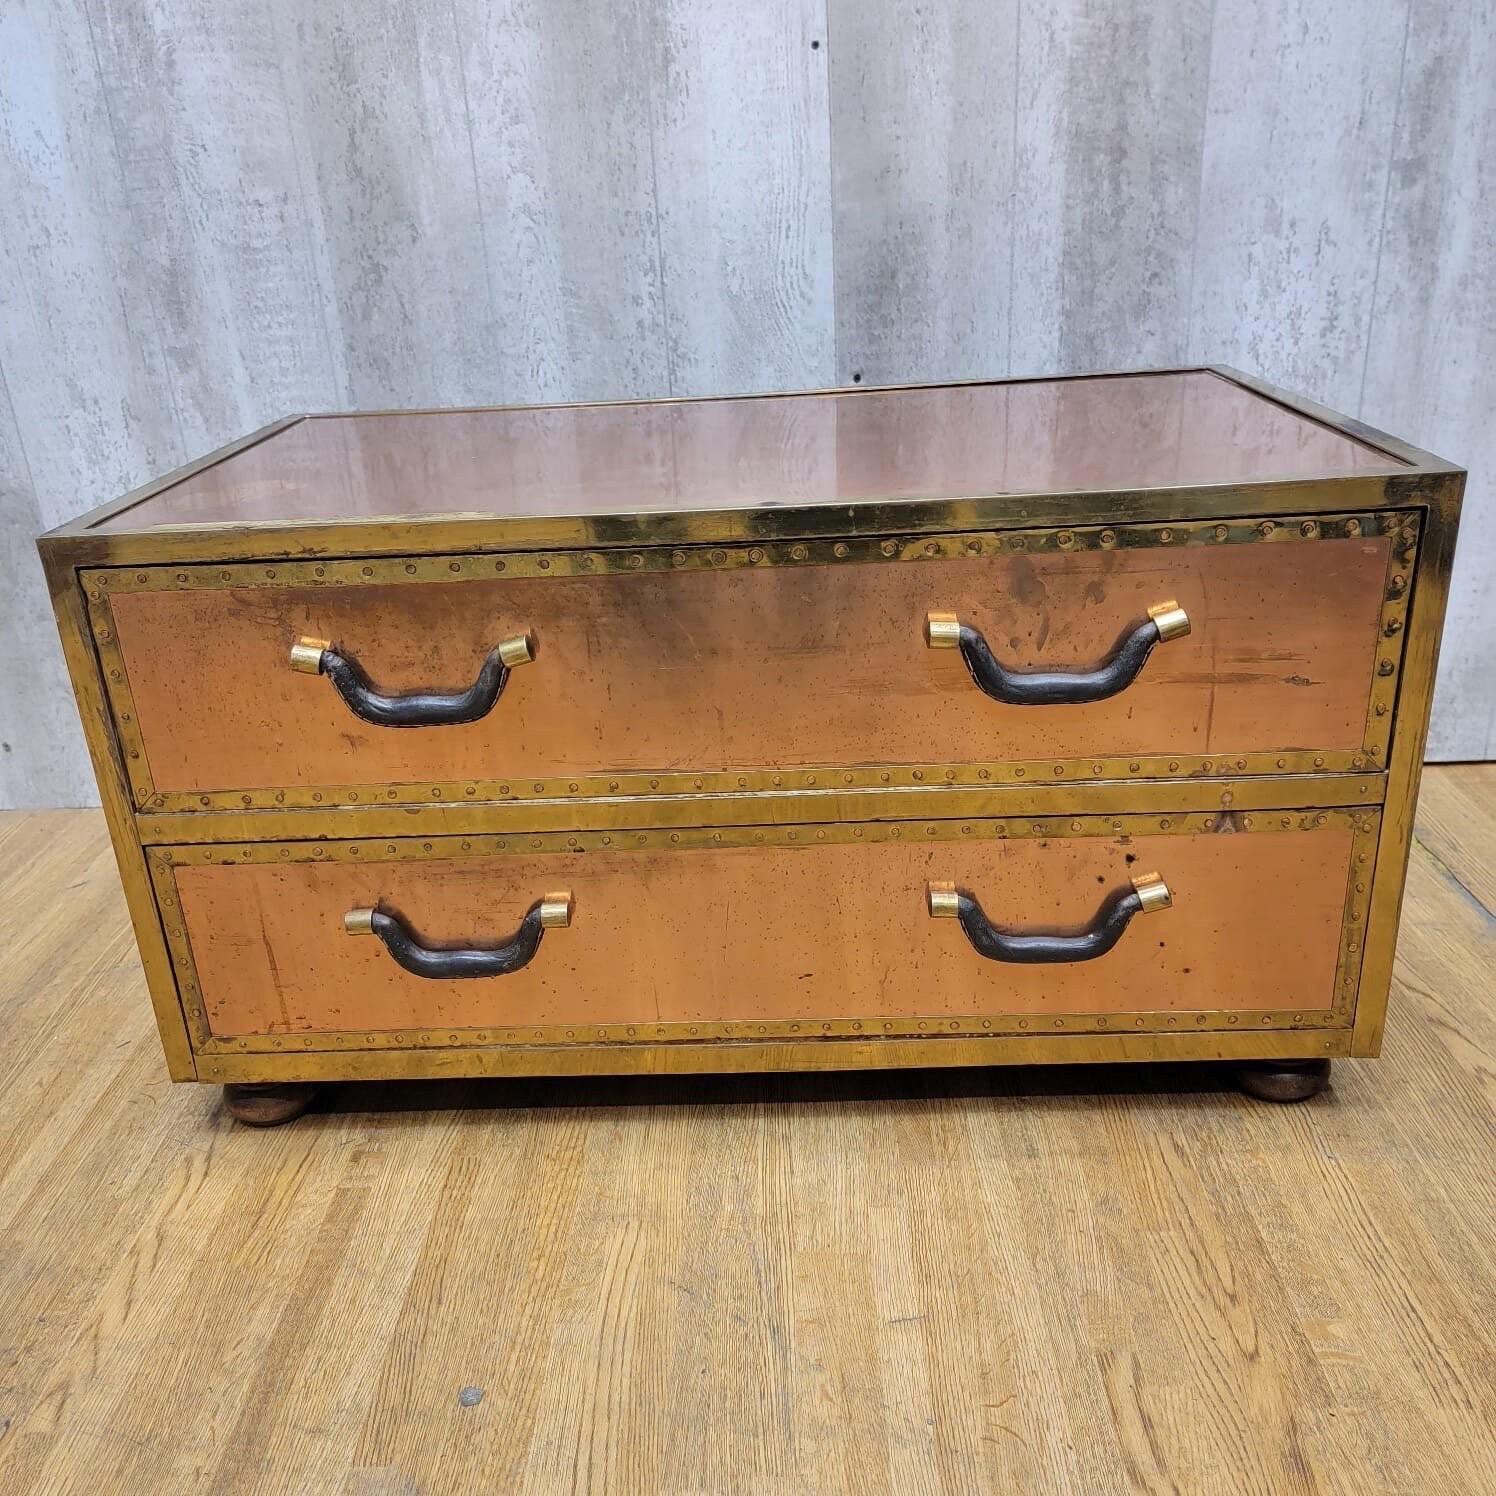 Vintage Copper Trunk Style Coffee Table with Leather Handles

Vintage Copper Trunk Style Coffee Table with Leather Handles & Glass Top with Two Drawers

circa 1940

Dimensions:

H 18